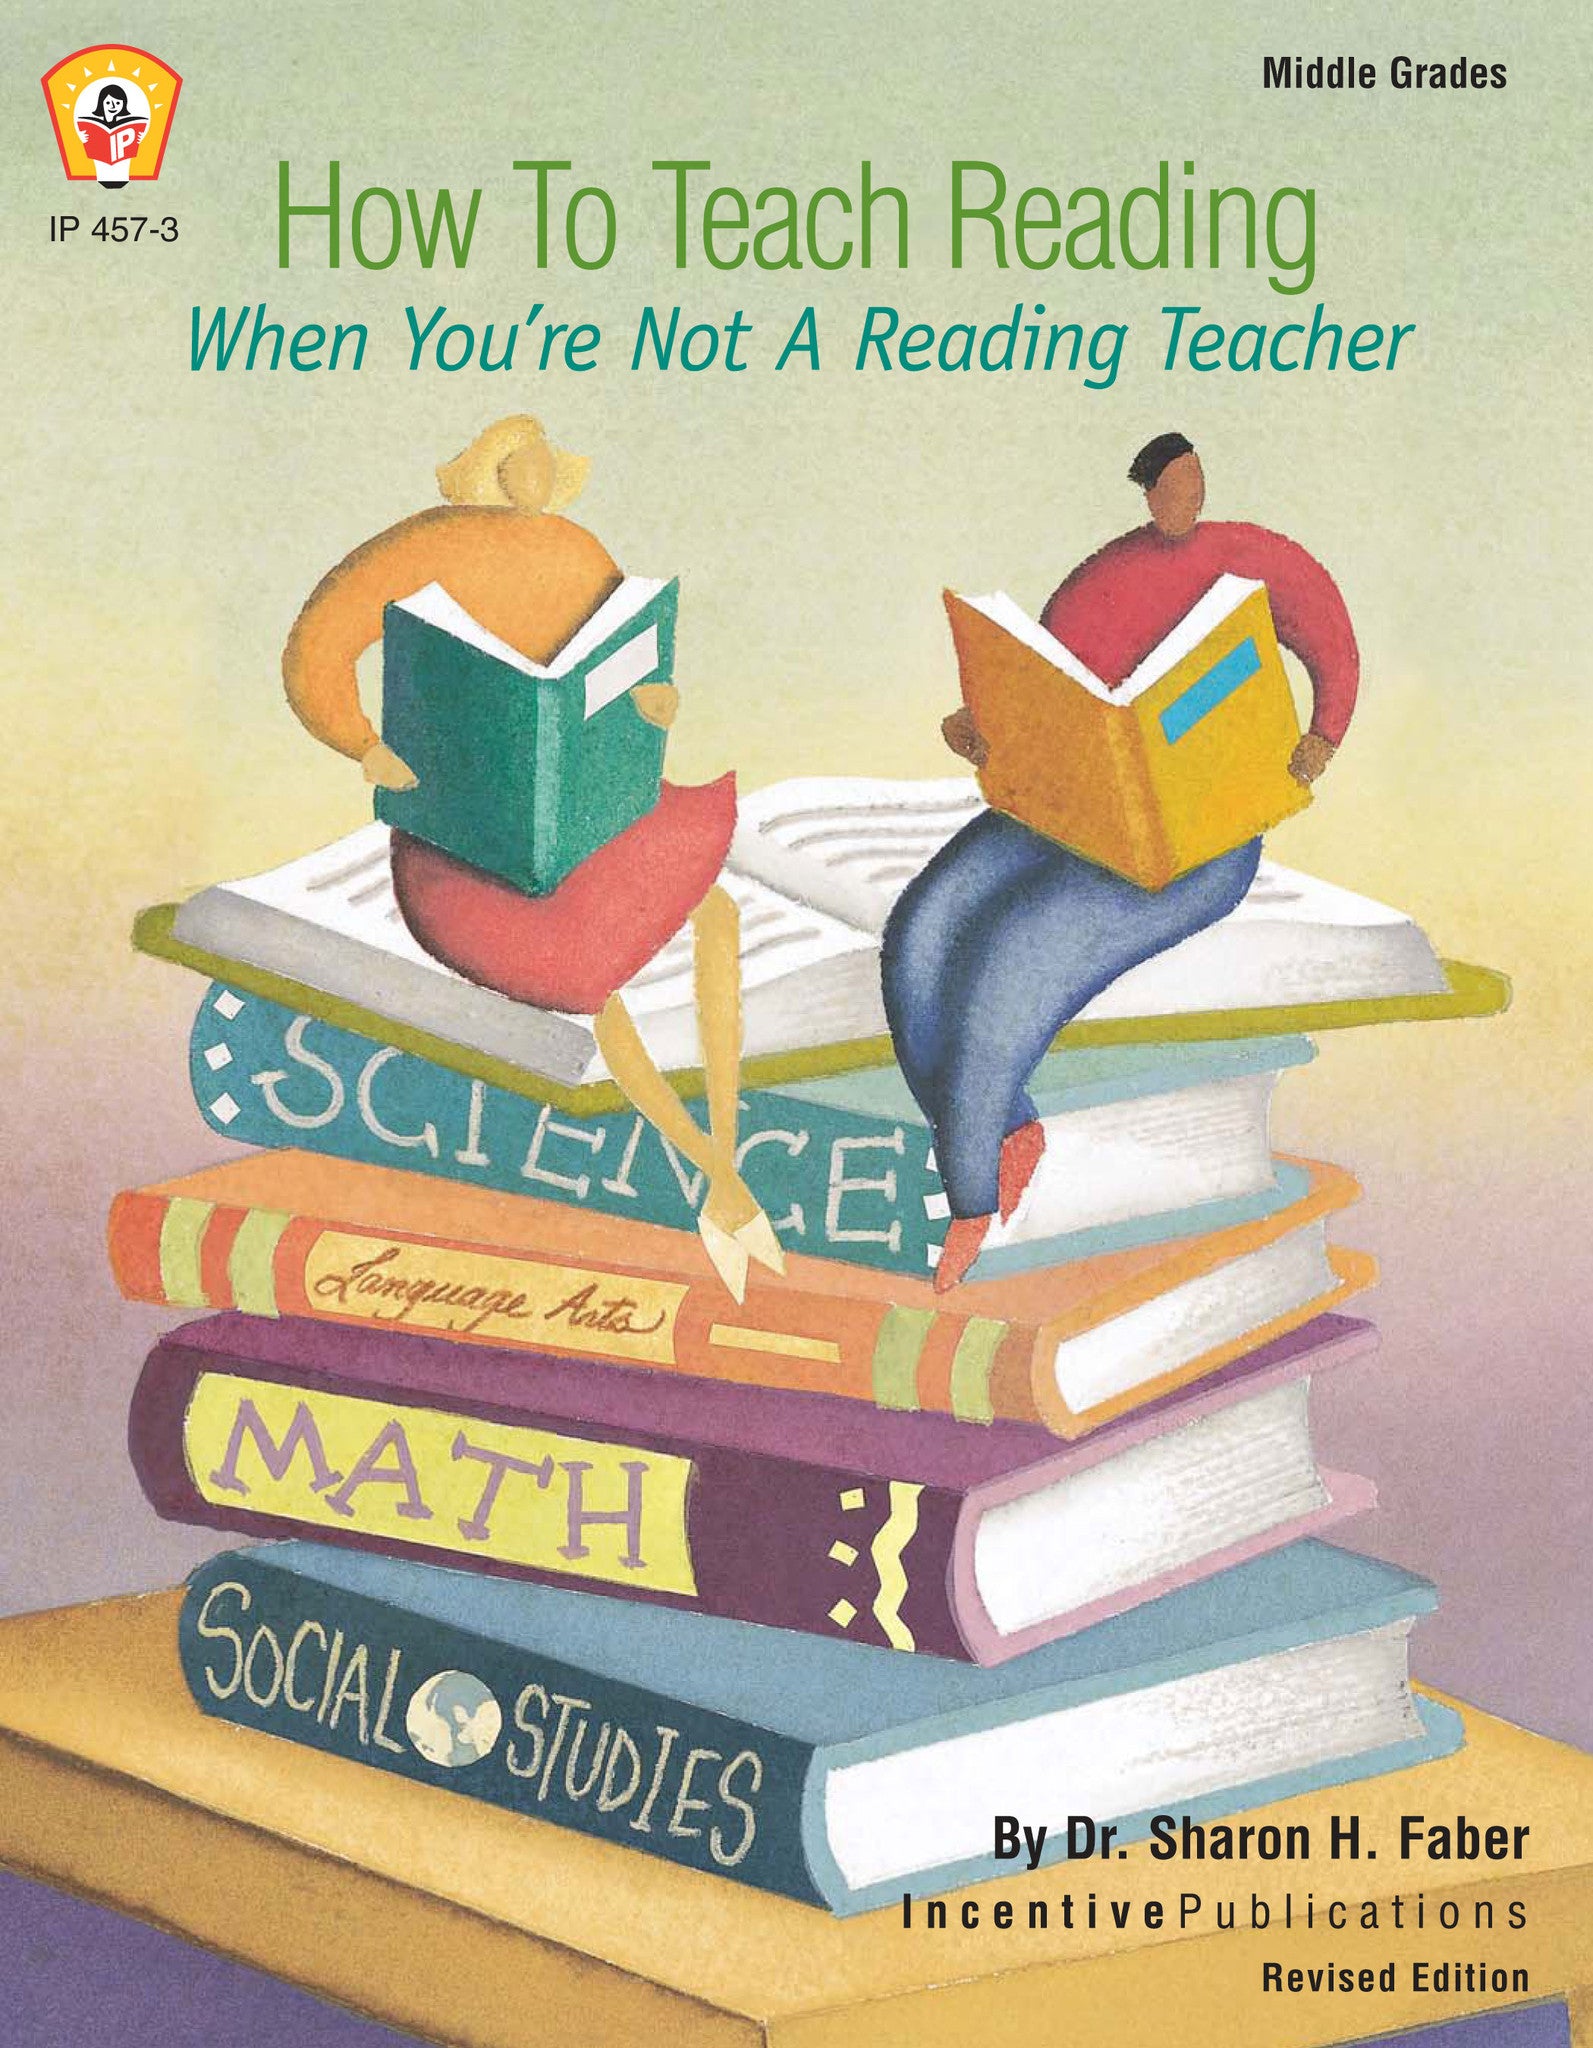 When you read this book. How to teach reading. Method teaching of reading for Kids. How to teach reading book. How to teach reading effectively..